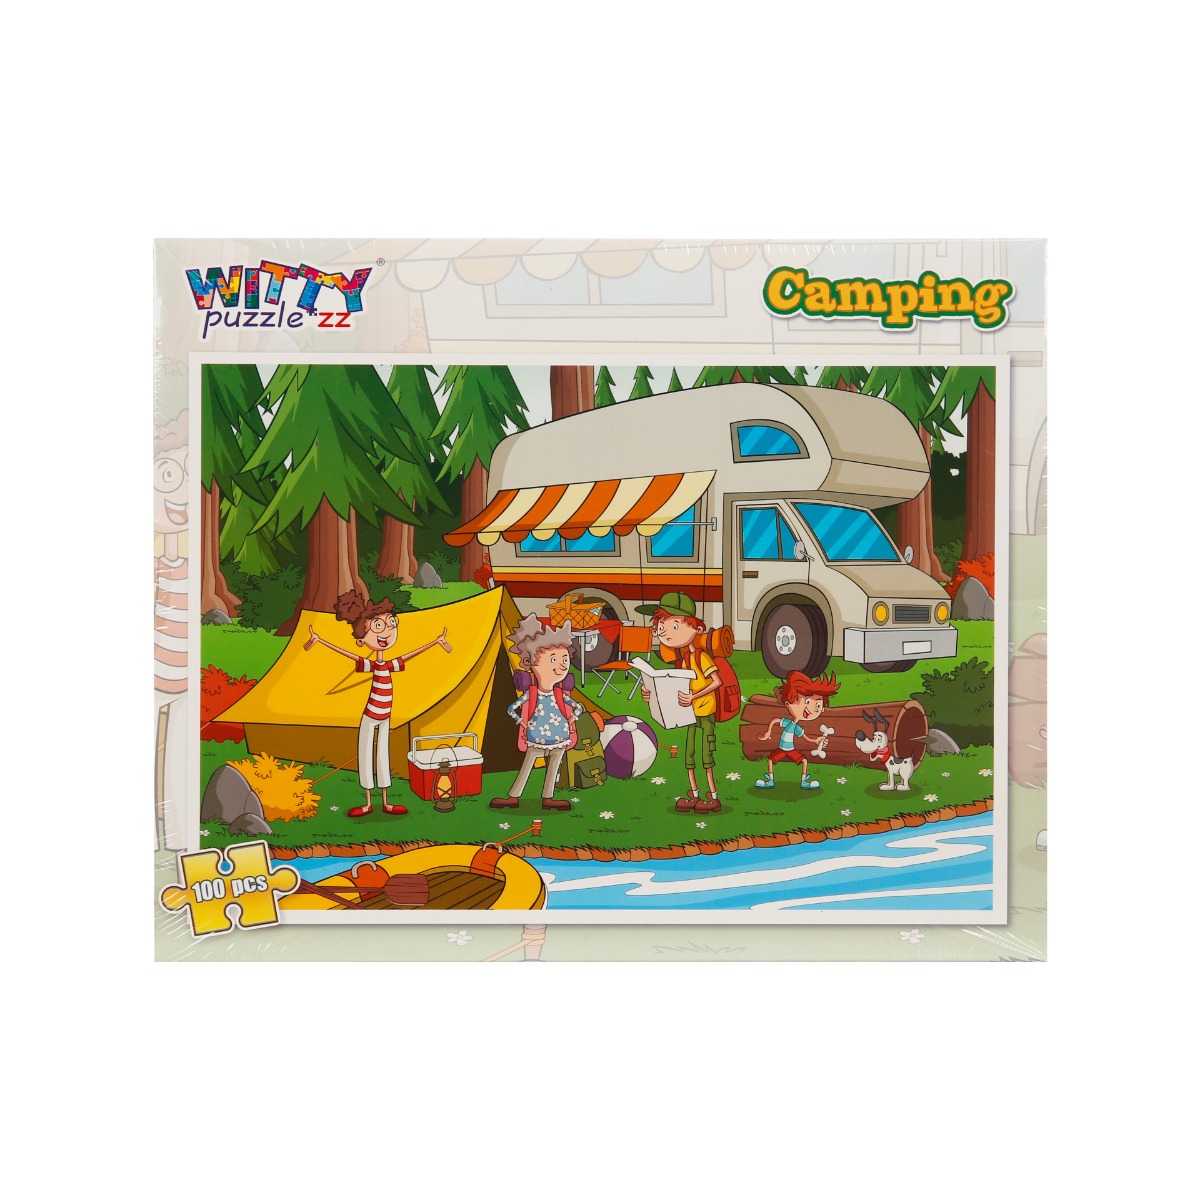 Puzzle Witty Puzzlezz, 100 piese, Camping 100% imagine 2022 protejamcopilaria.ro